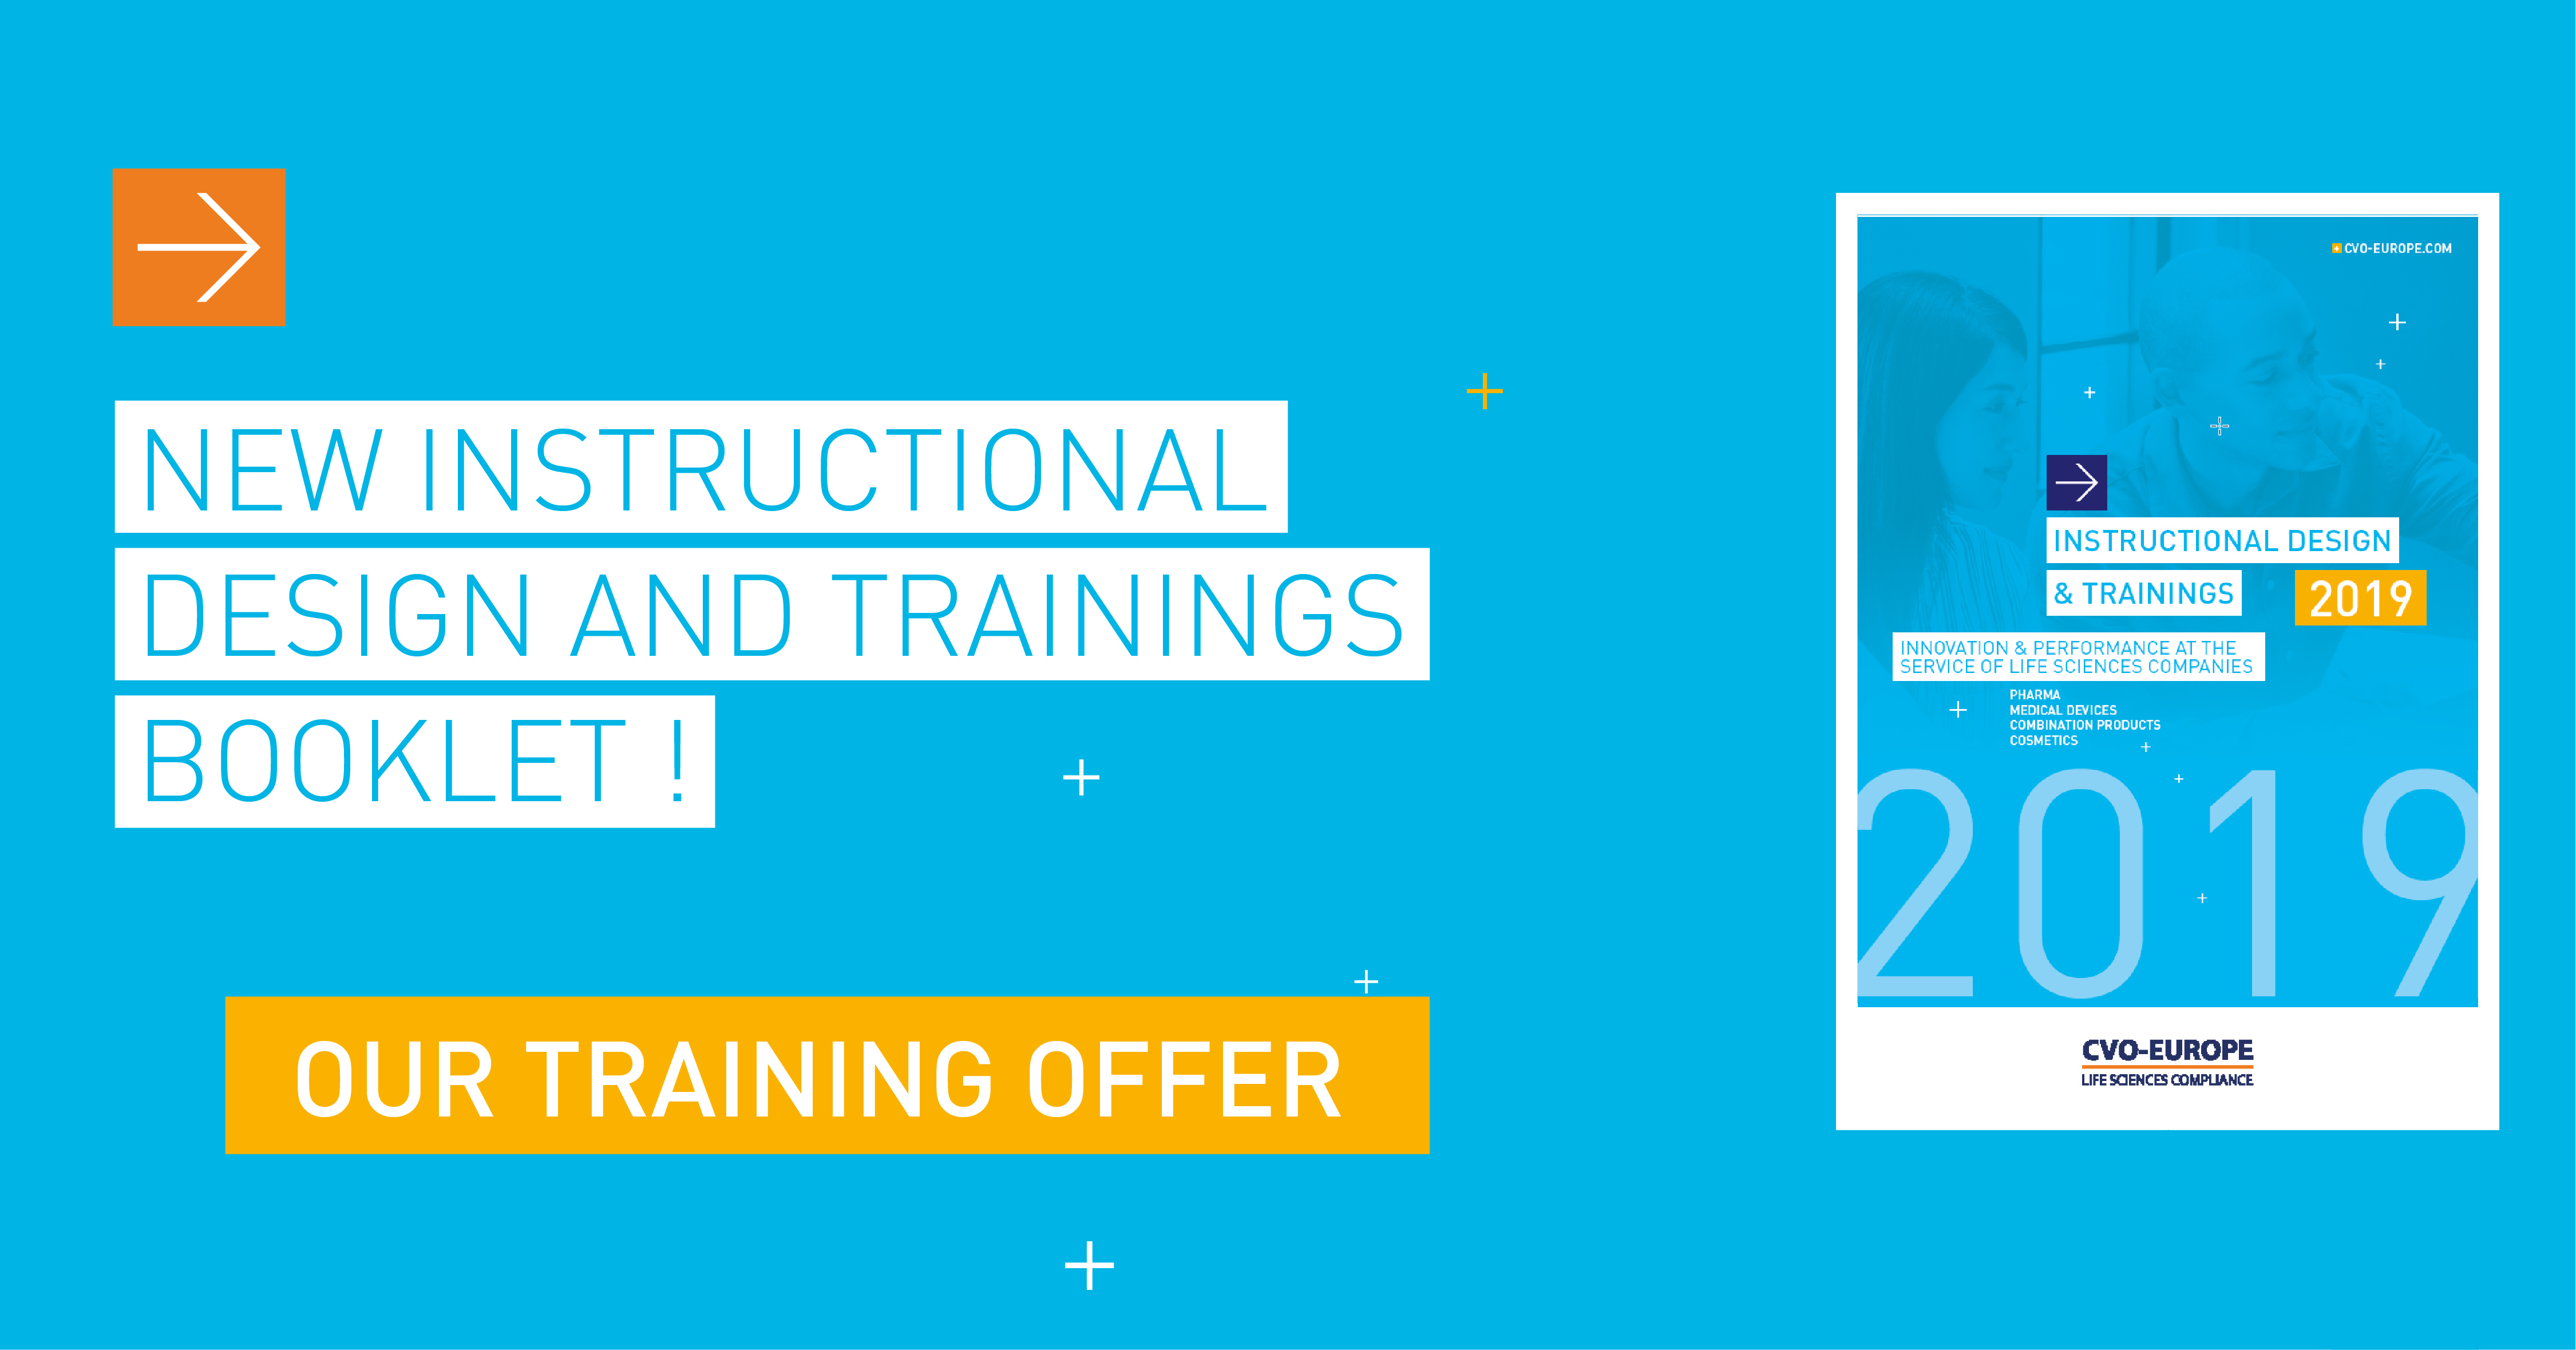 CVO-EUROPE new instructional design and training booklet for 2019